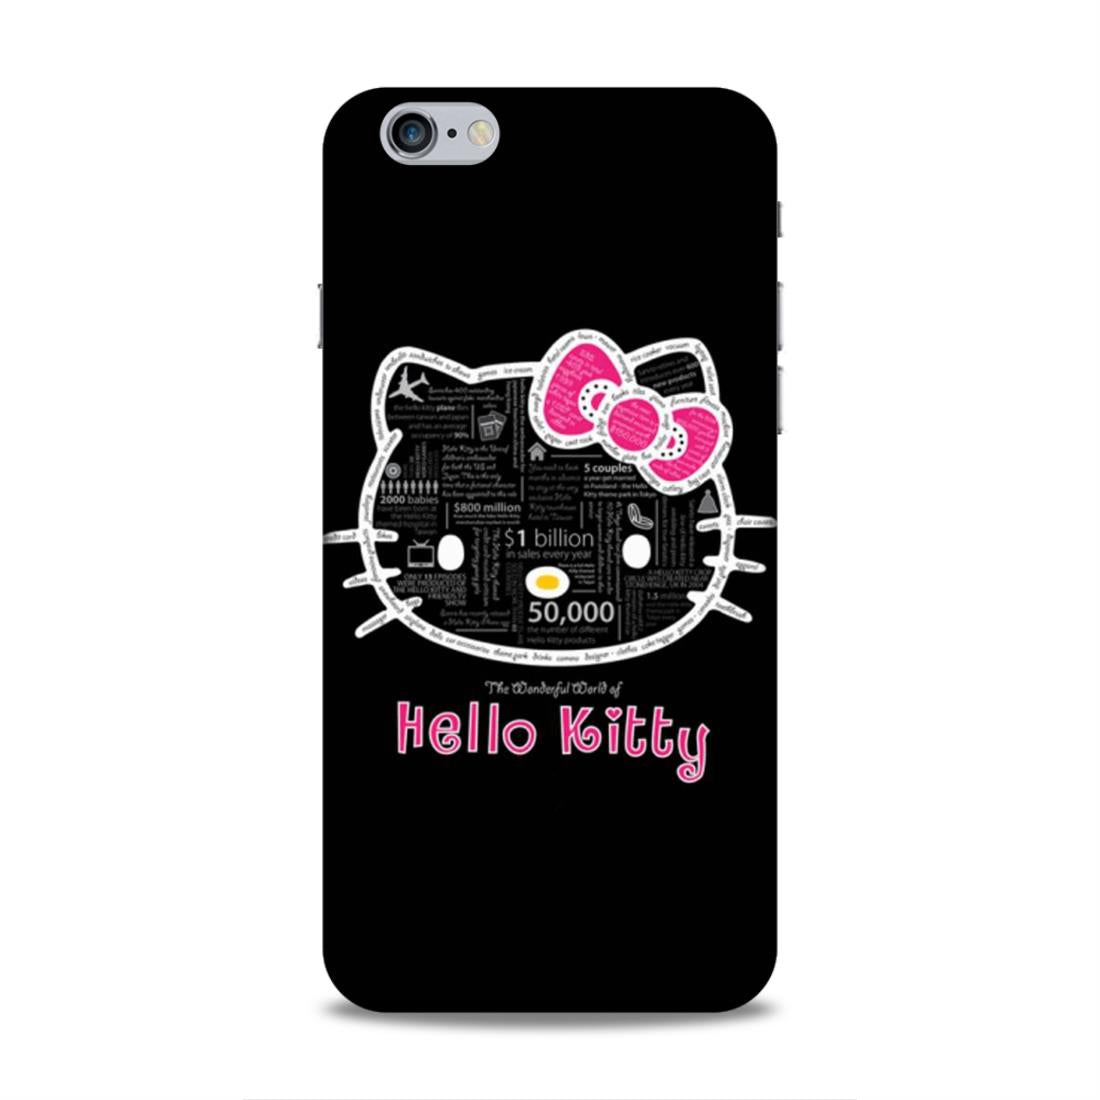 Hello Kitty Hard Back Case For Apple iPhone 6 Plus / 6s Plus